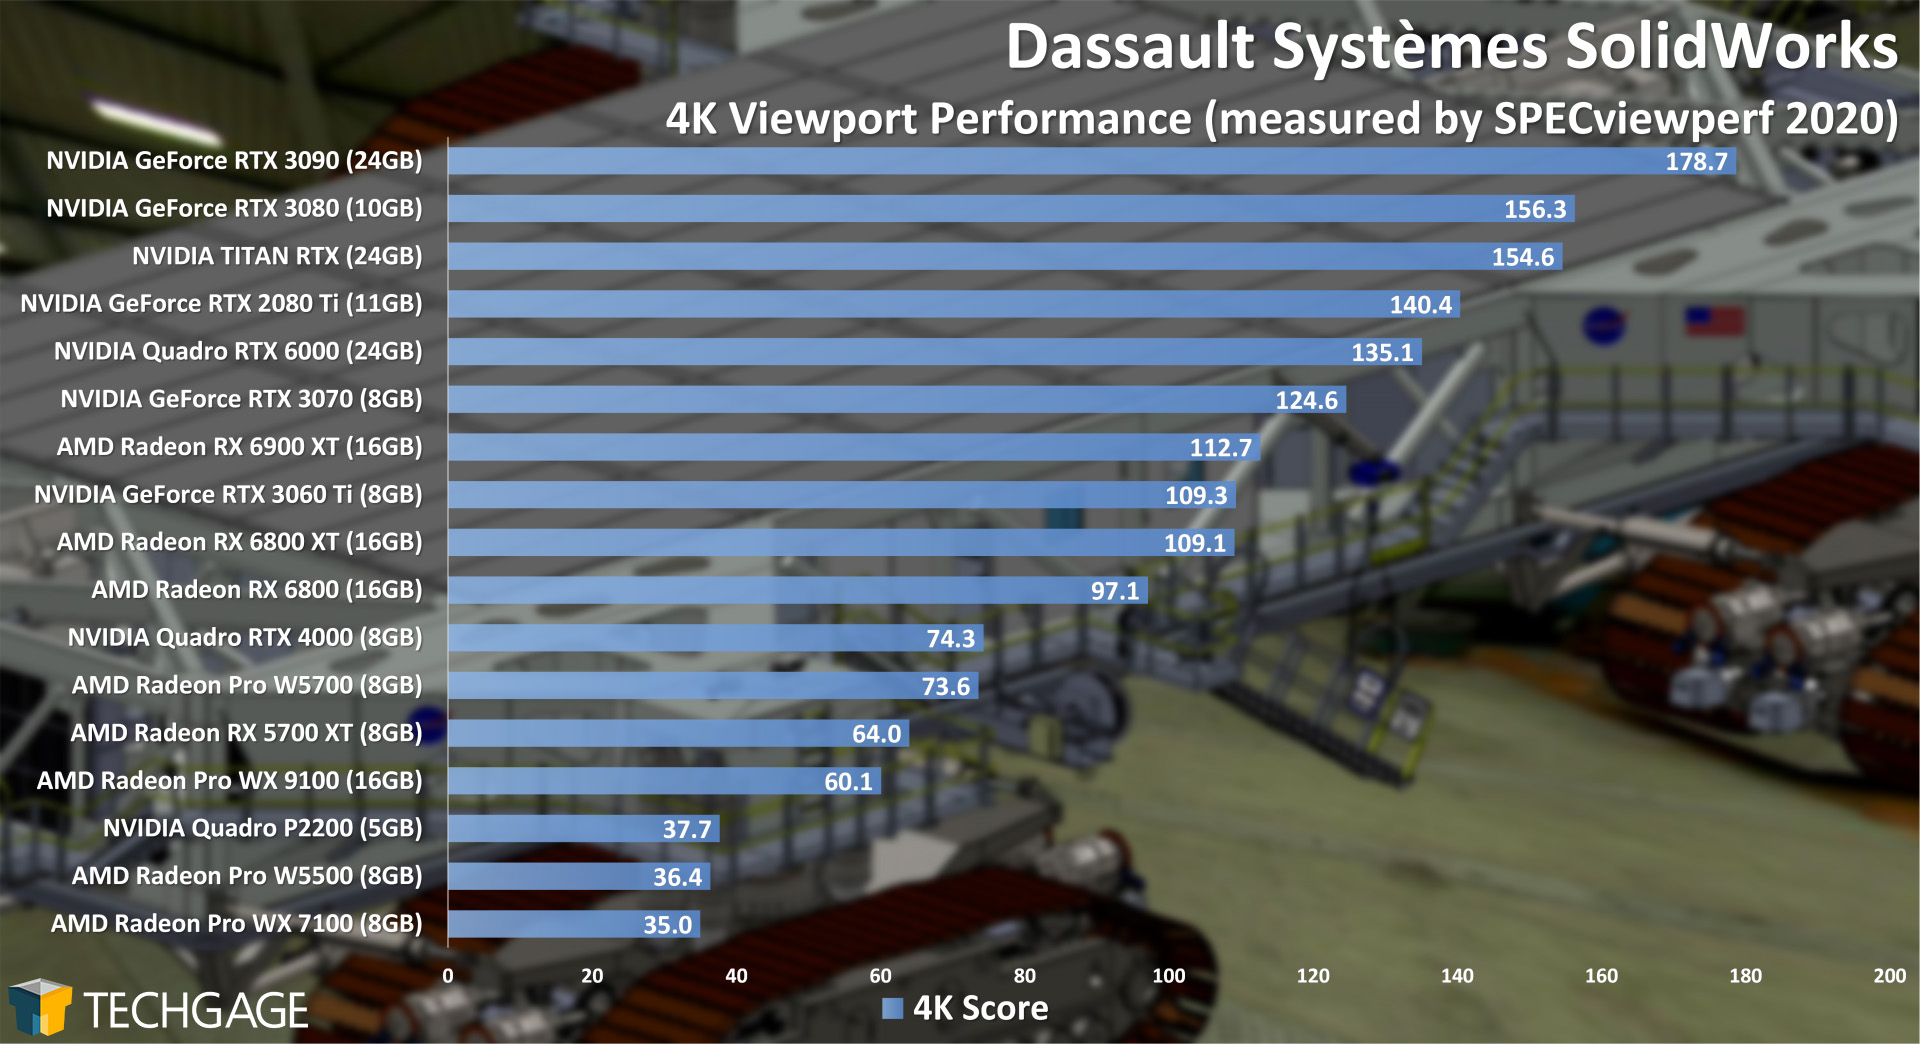 Dassault-Systemes-SolidWorks-4K-Viewport-Performance-February-2021.jpg